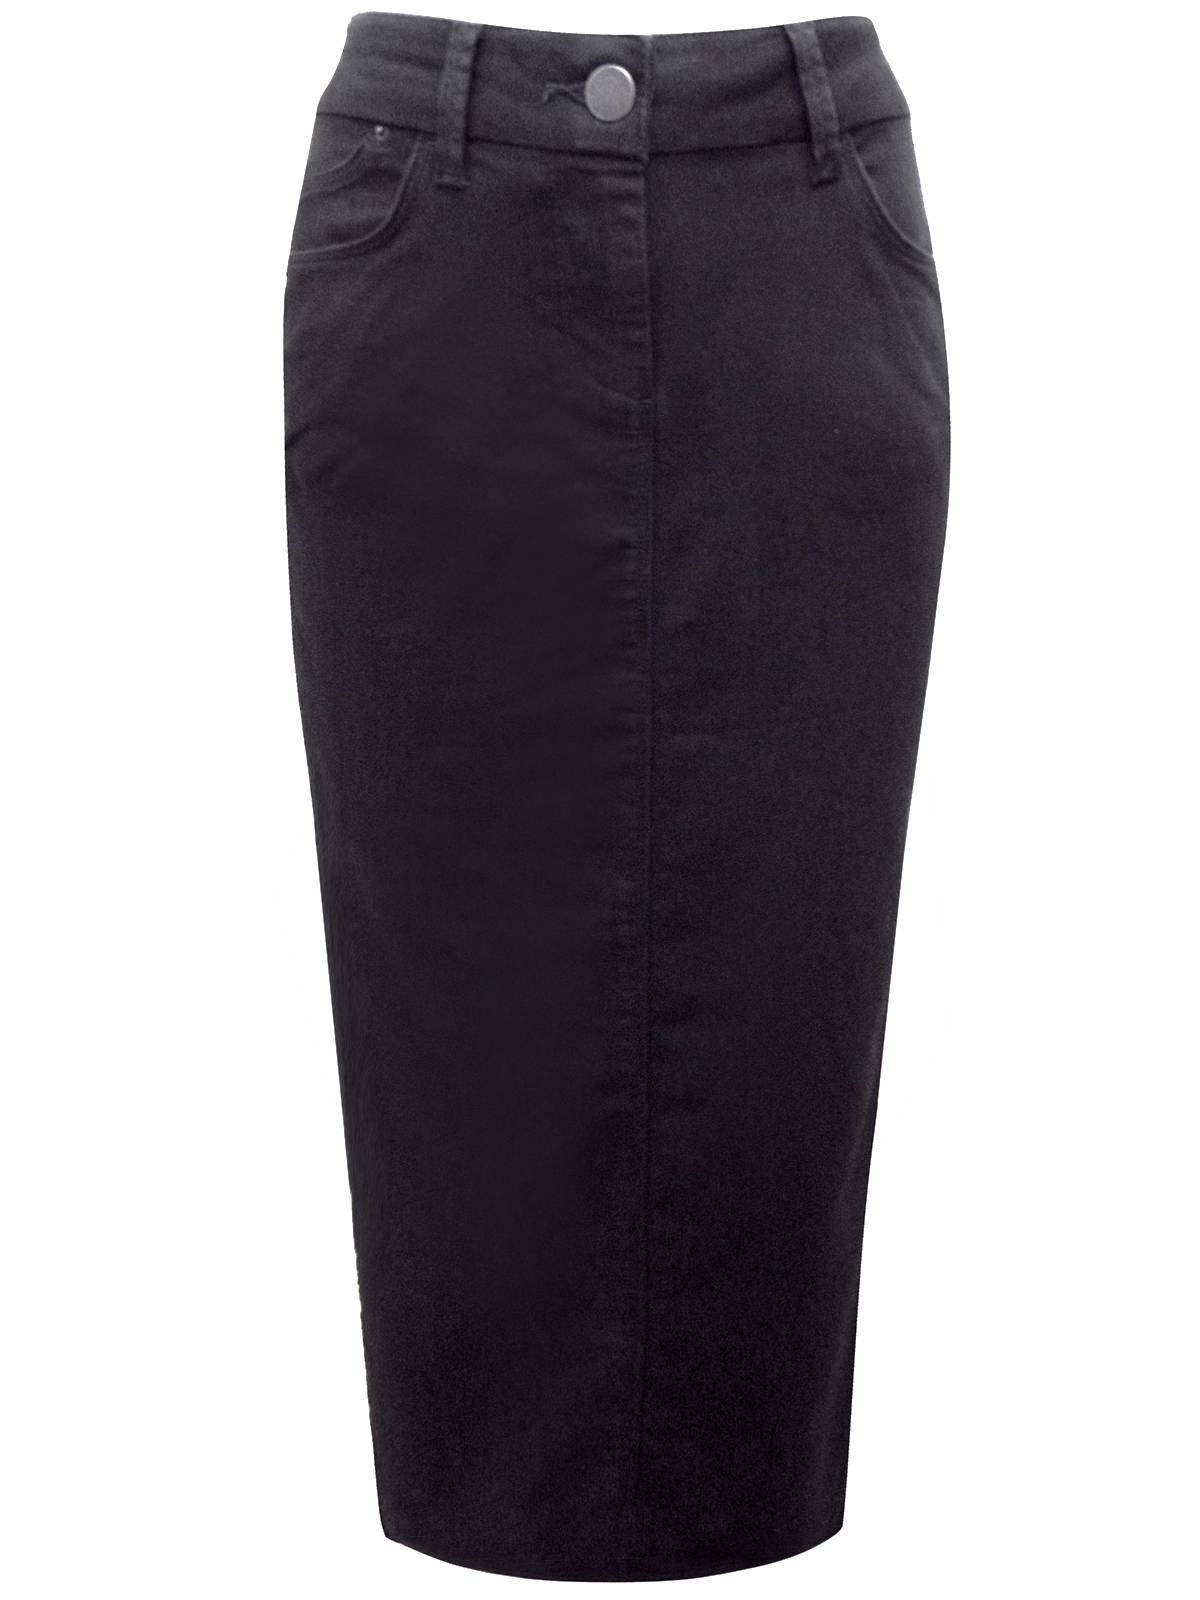 Marks and Spencer - - M&5 BLACK Cotton Rich Long Denim Skirt 39inches ...